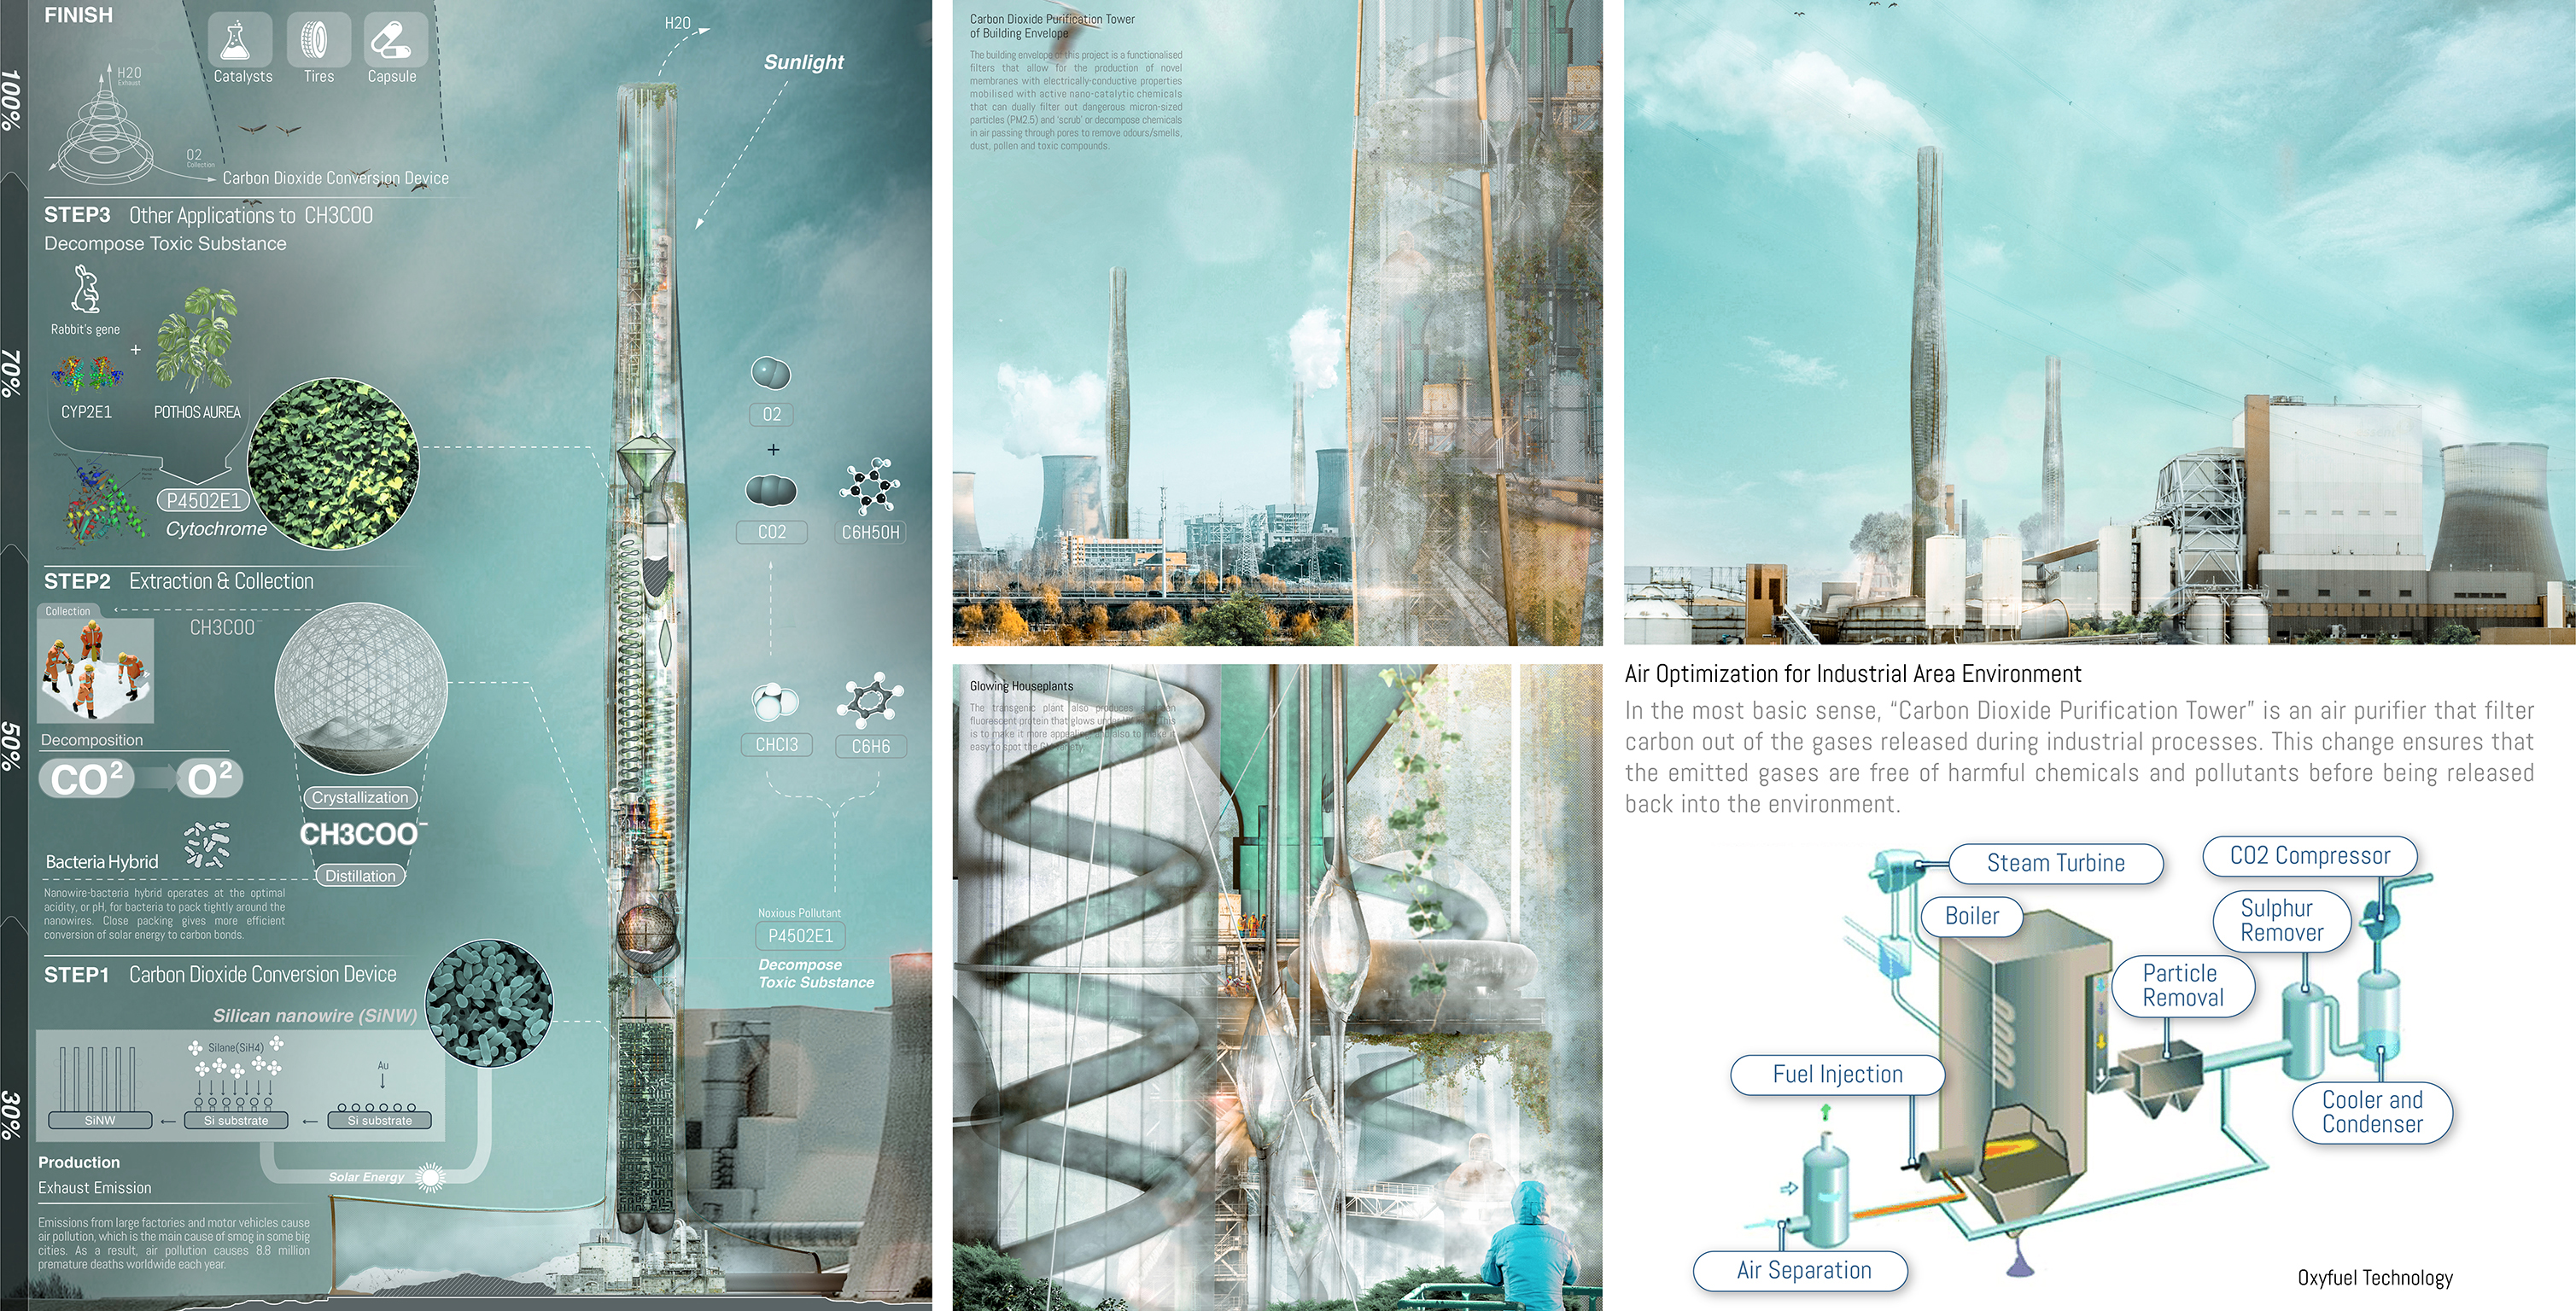 Carbon Dioxide Purification Tower